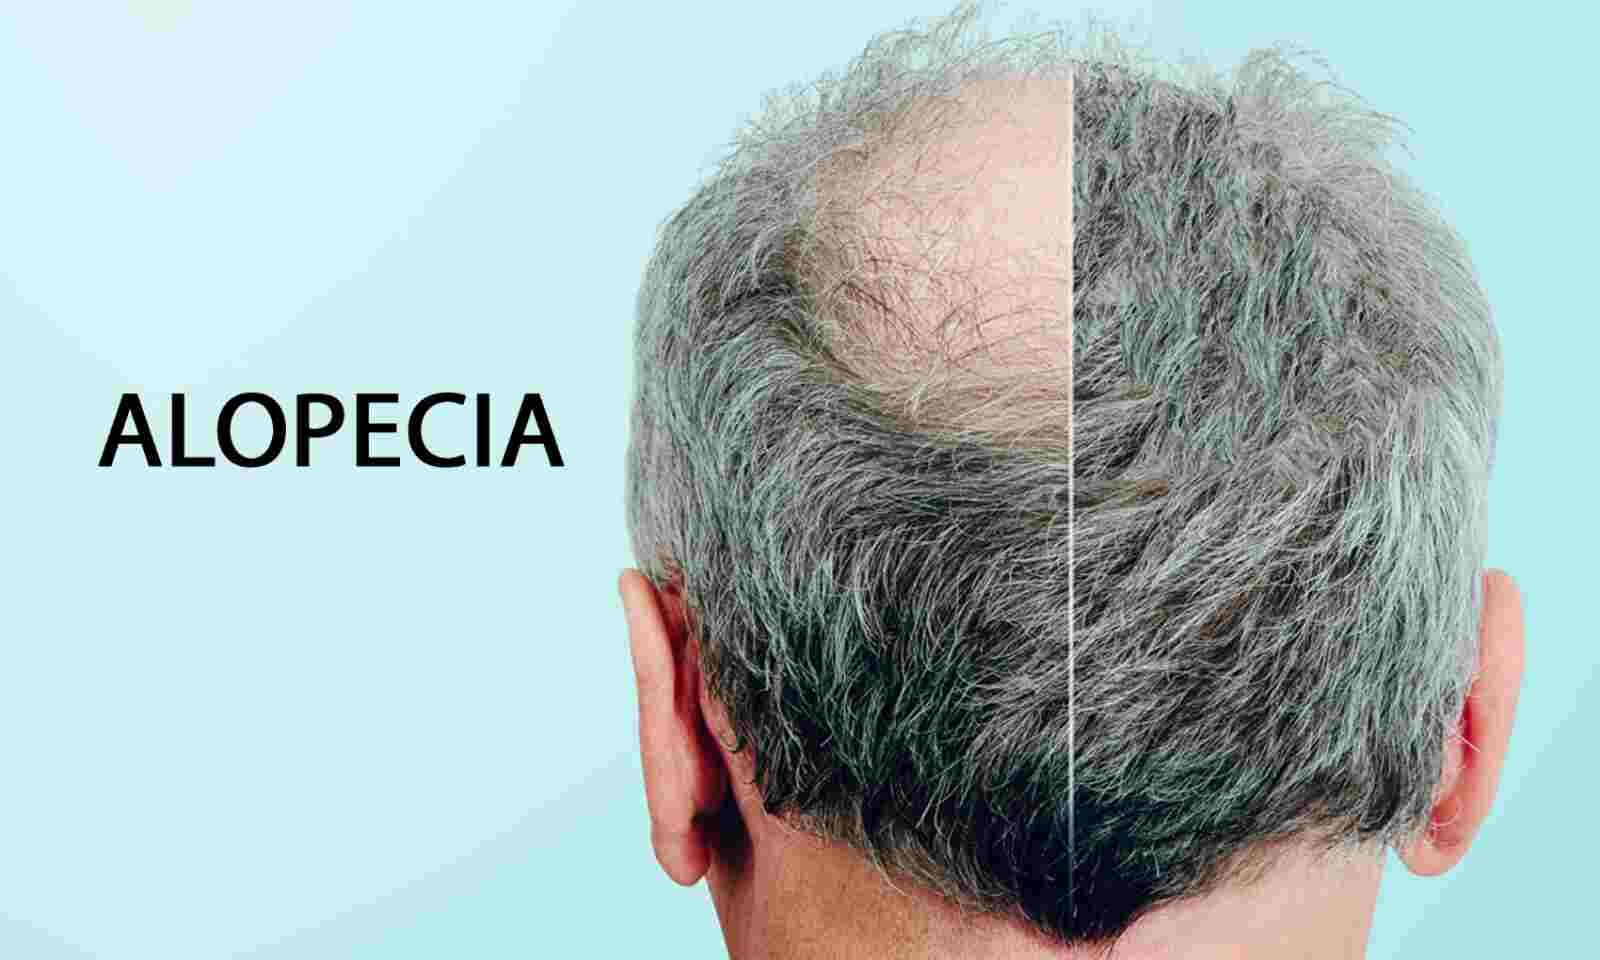 Low dose Oral Minoxidil Safe for Non-scarring Alopecia, finds study